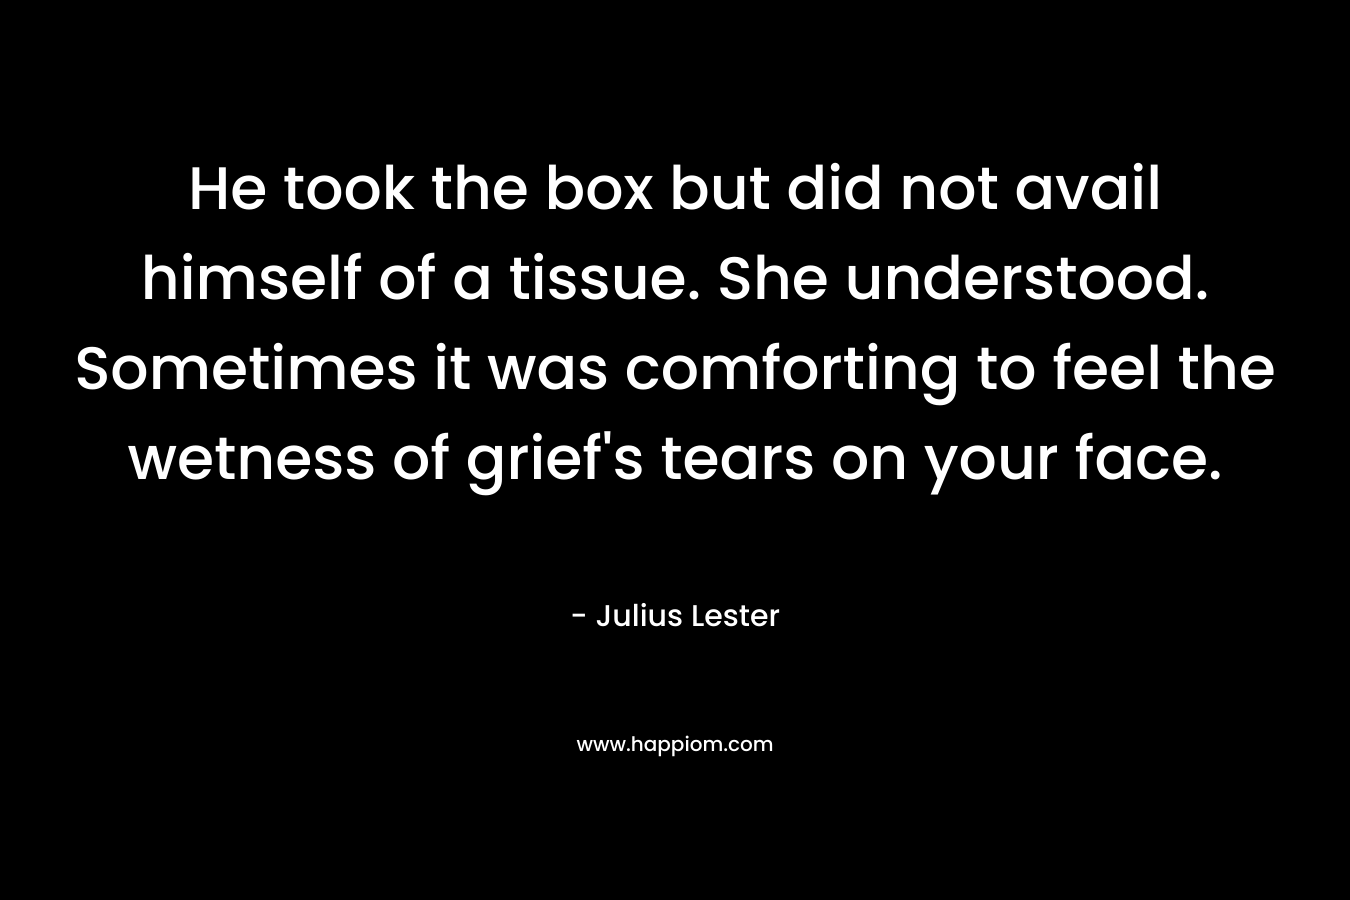 He took the box but did not avail himself of a tissue. She understood. Sometimes it was comforting to feel the wetness of grief's tears on your face.